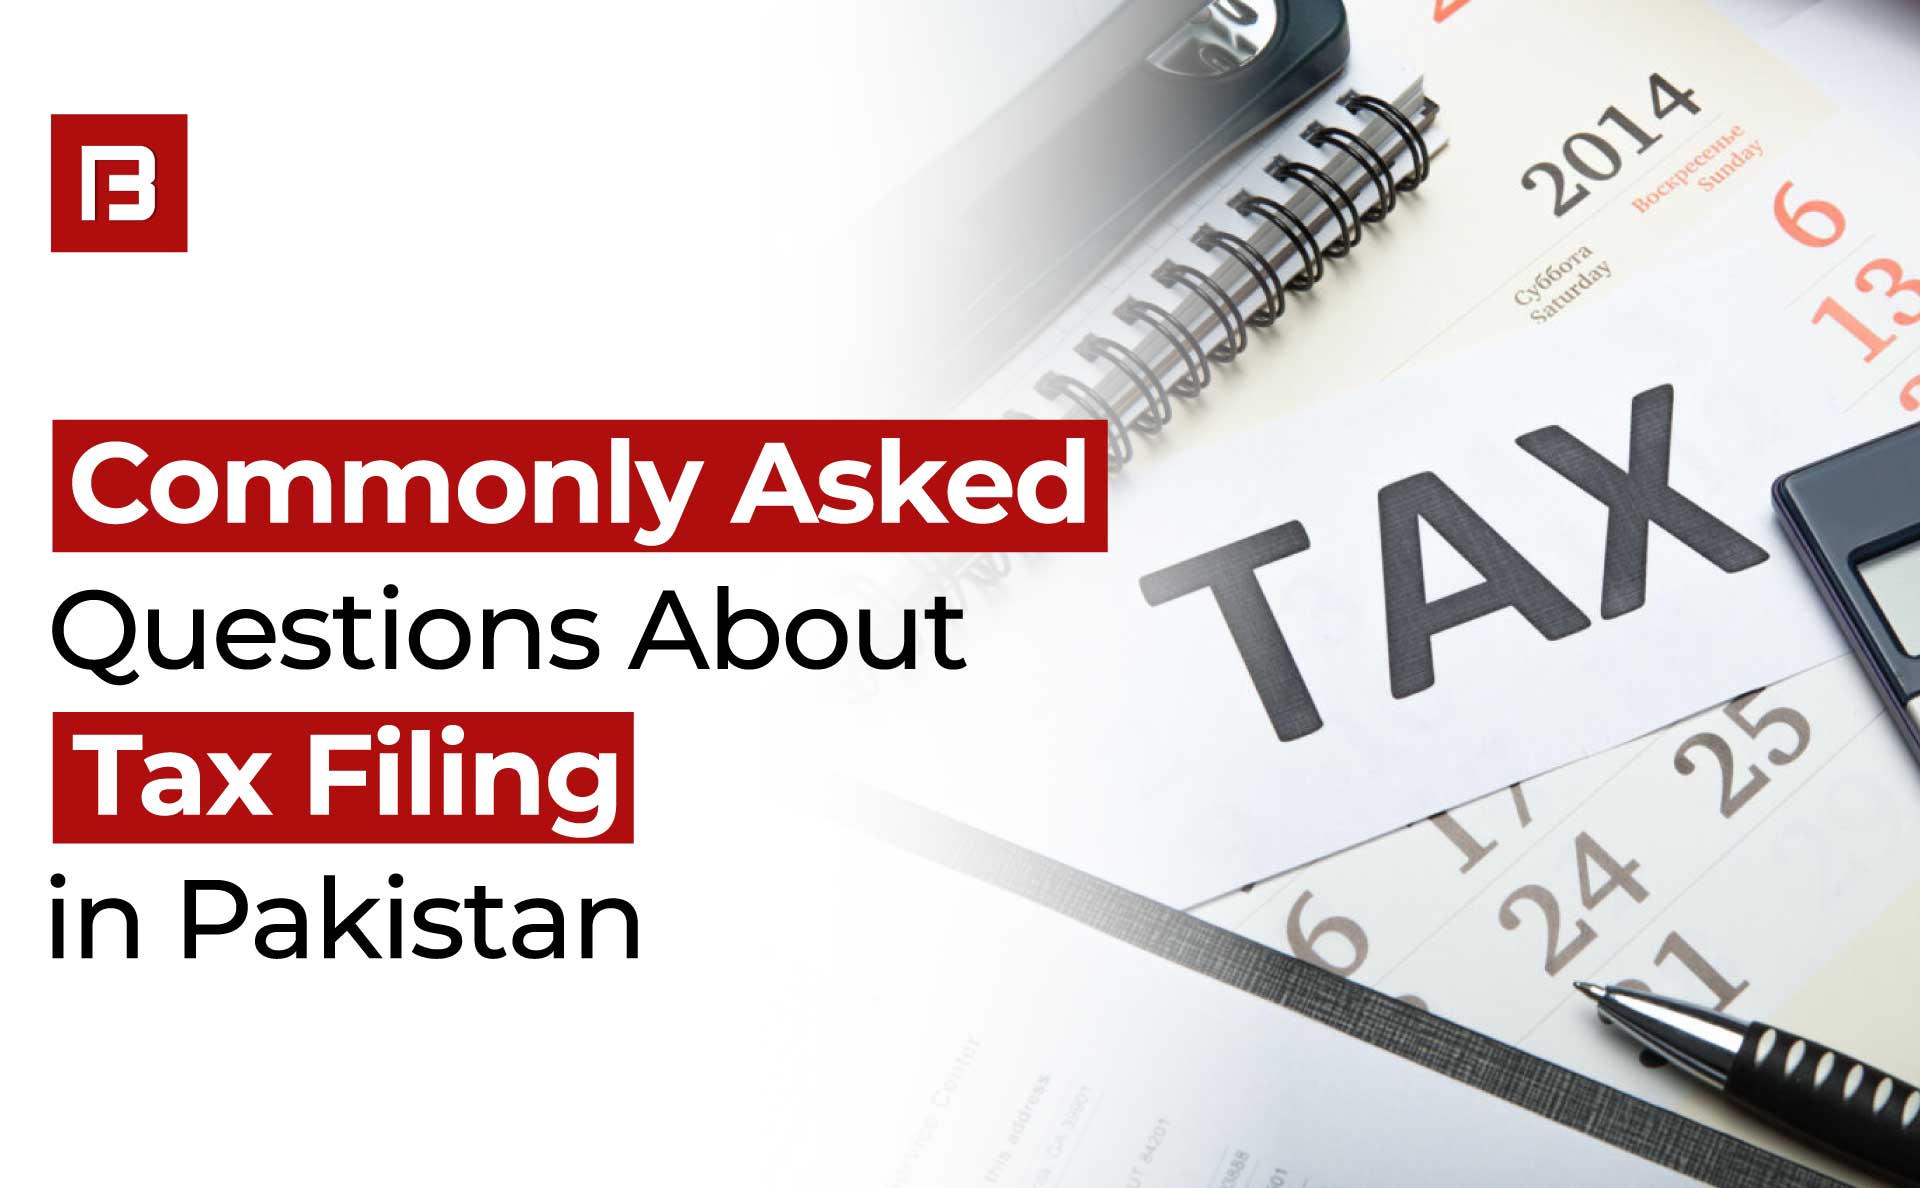 Commonly Asked Questions About Tax Filing in Pakistan